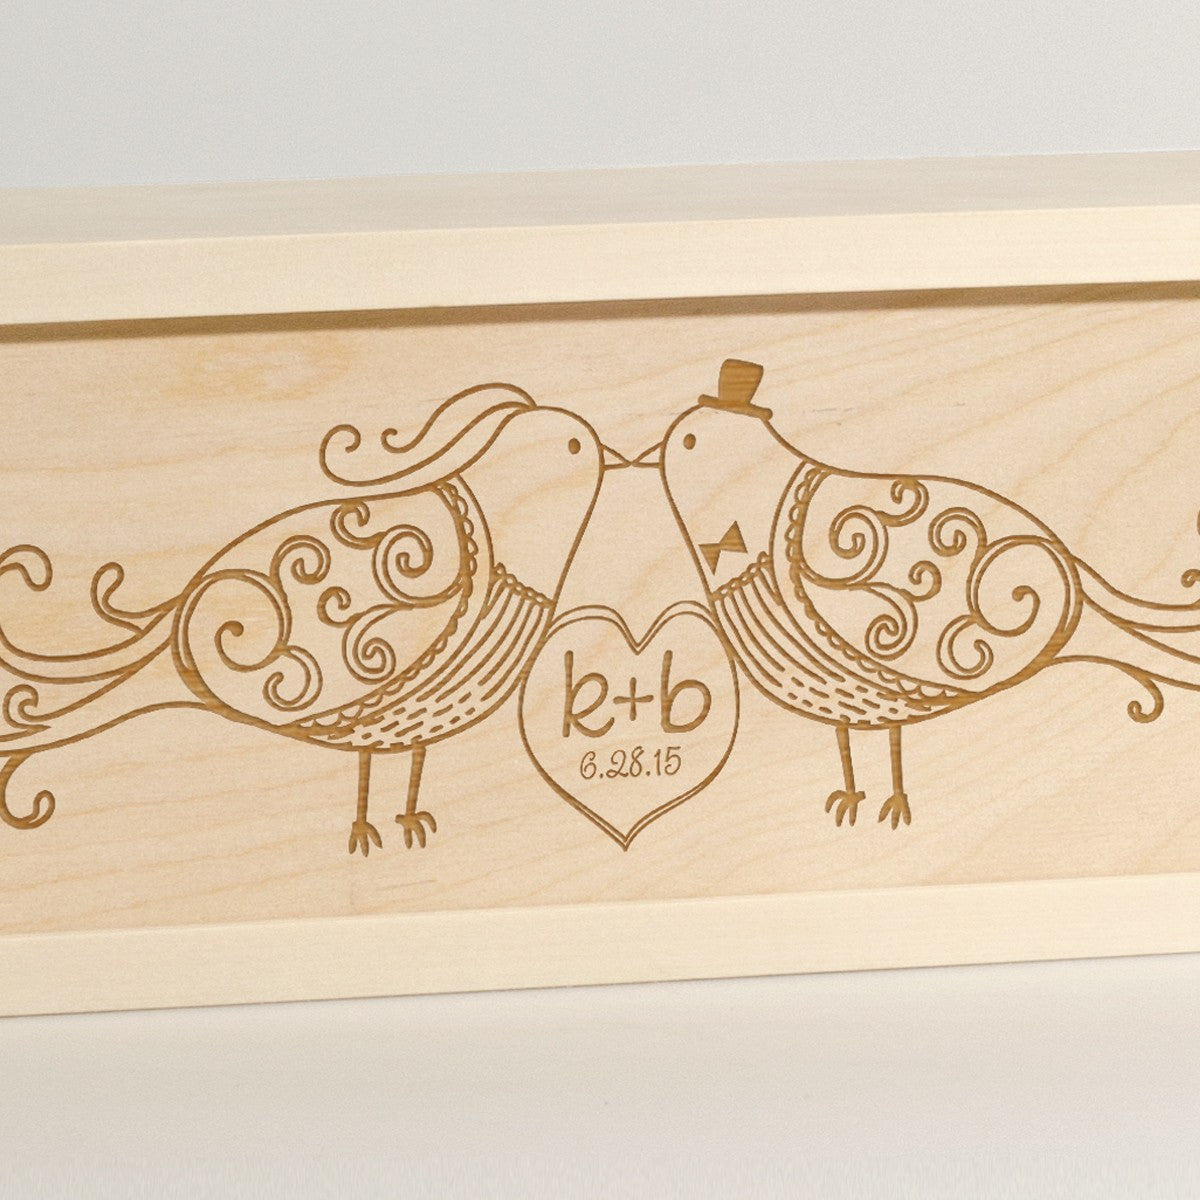 Fly Away With Me - Wedding Wine Box - Detail Image